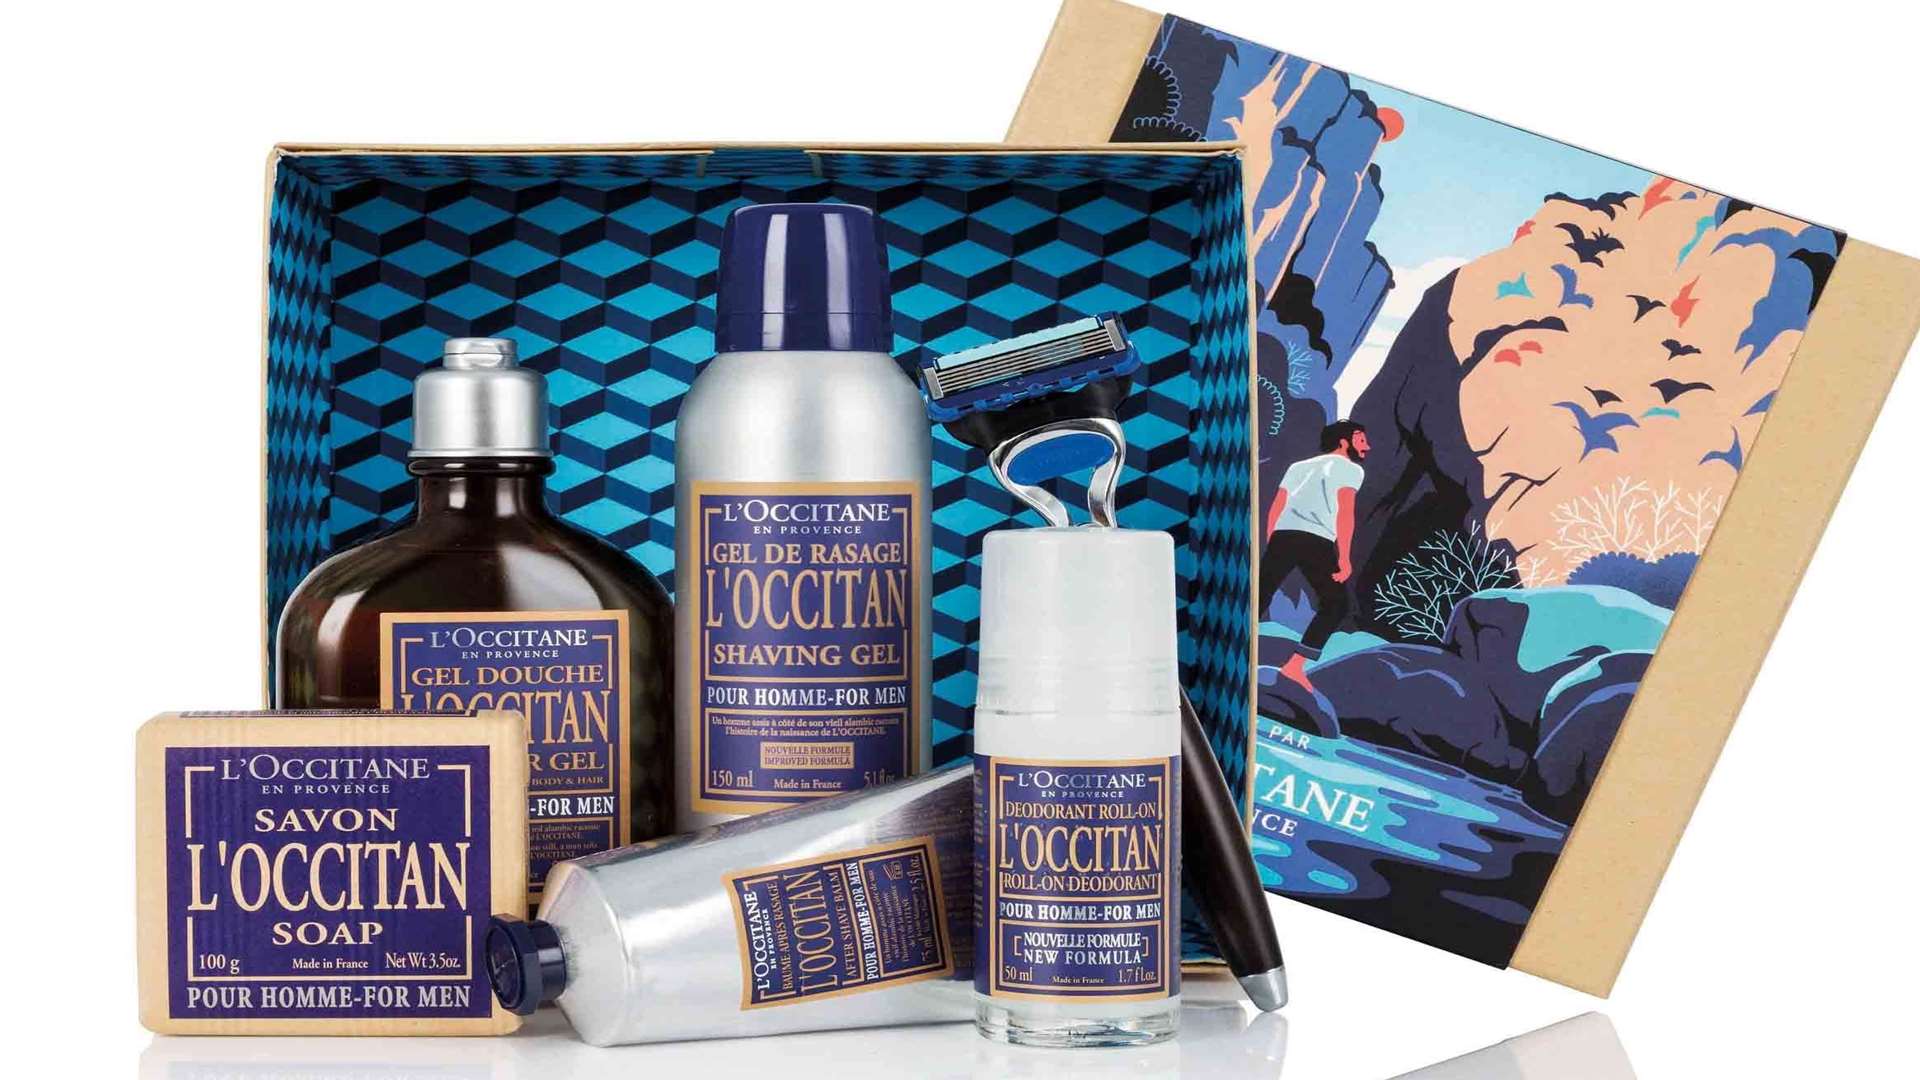 For the papa who really likes to pamper, it's got to be the Deluxe L'Occitan Collection, a six-piece set of shower and shave essentials infused with a suitably manly aroma, £120 at www.loccitane.com